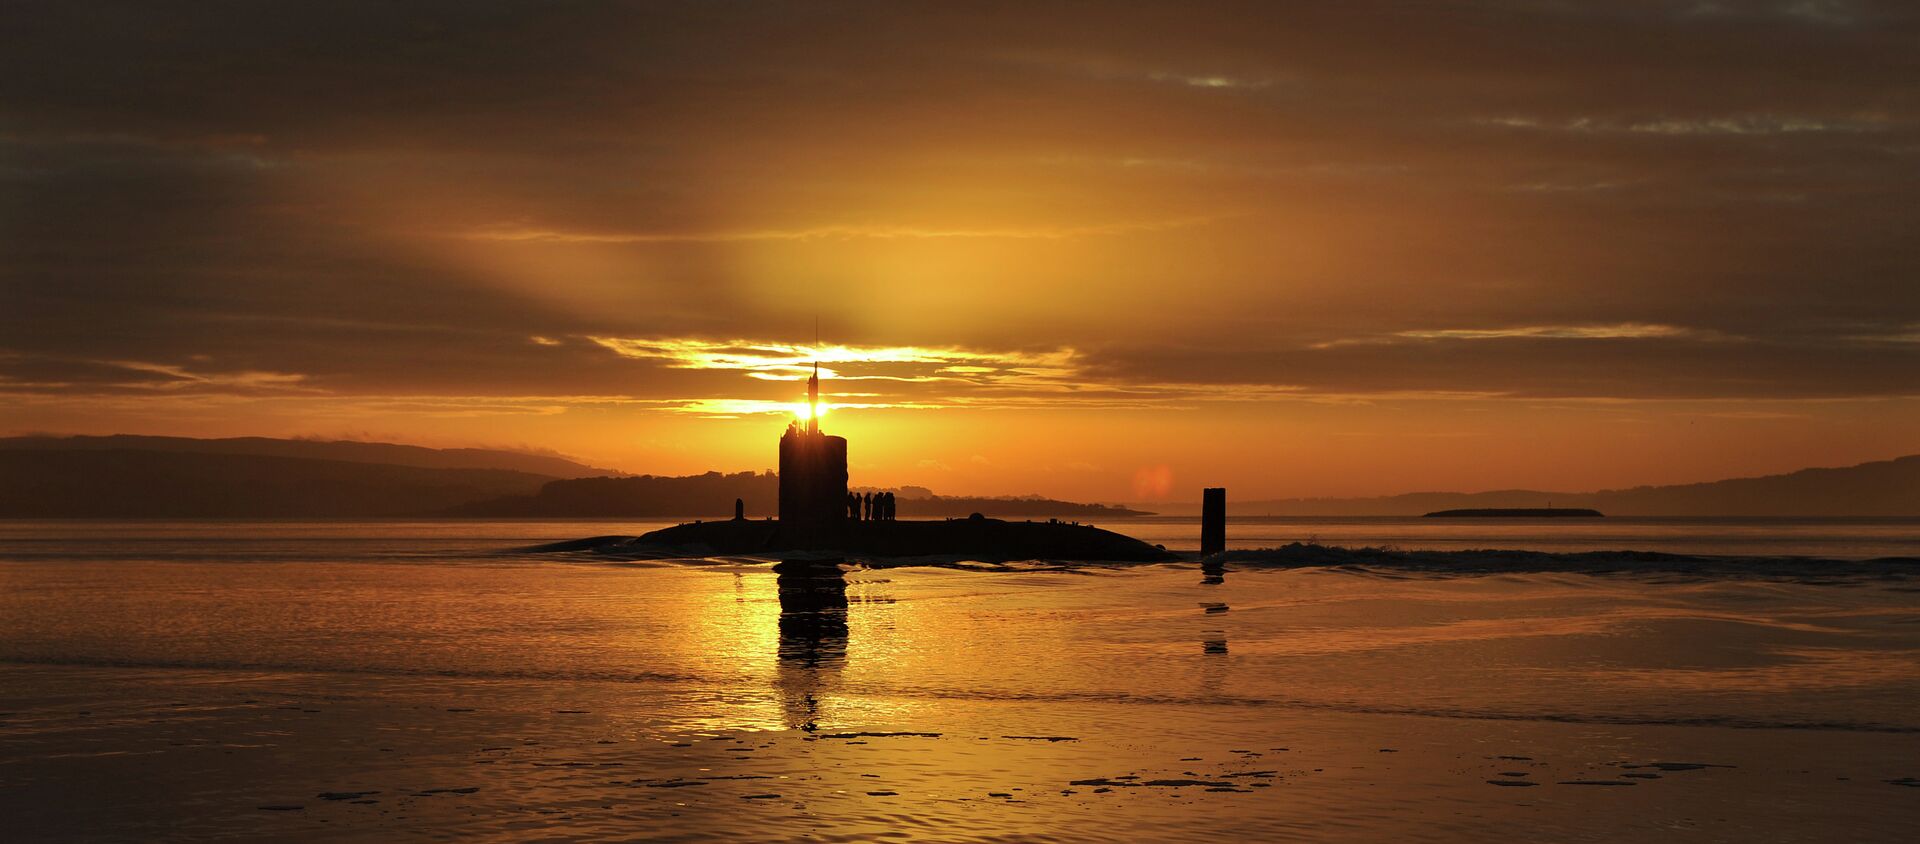 In this image made available by the Ministry of Defence in London, 18 October 2010, the sun rises over the Royal Navy nuclear attack submarine HMS Triumph, as she comes into a naval base on the River Clyde in Scotland - Sputnik International, 1920, 13.03.2021